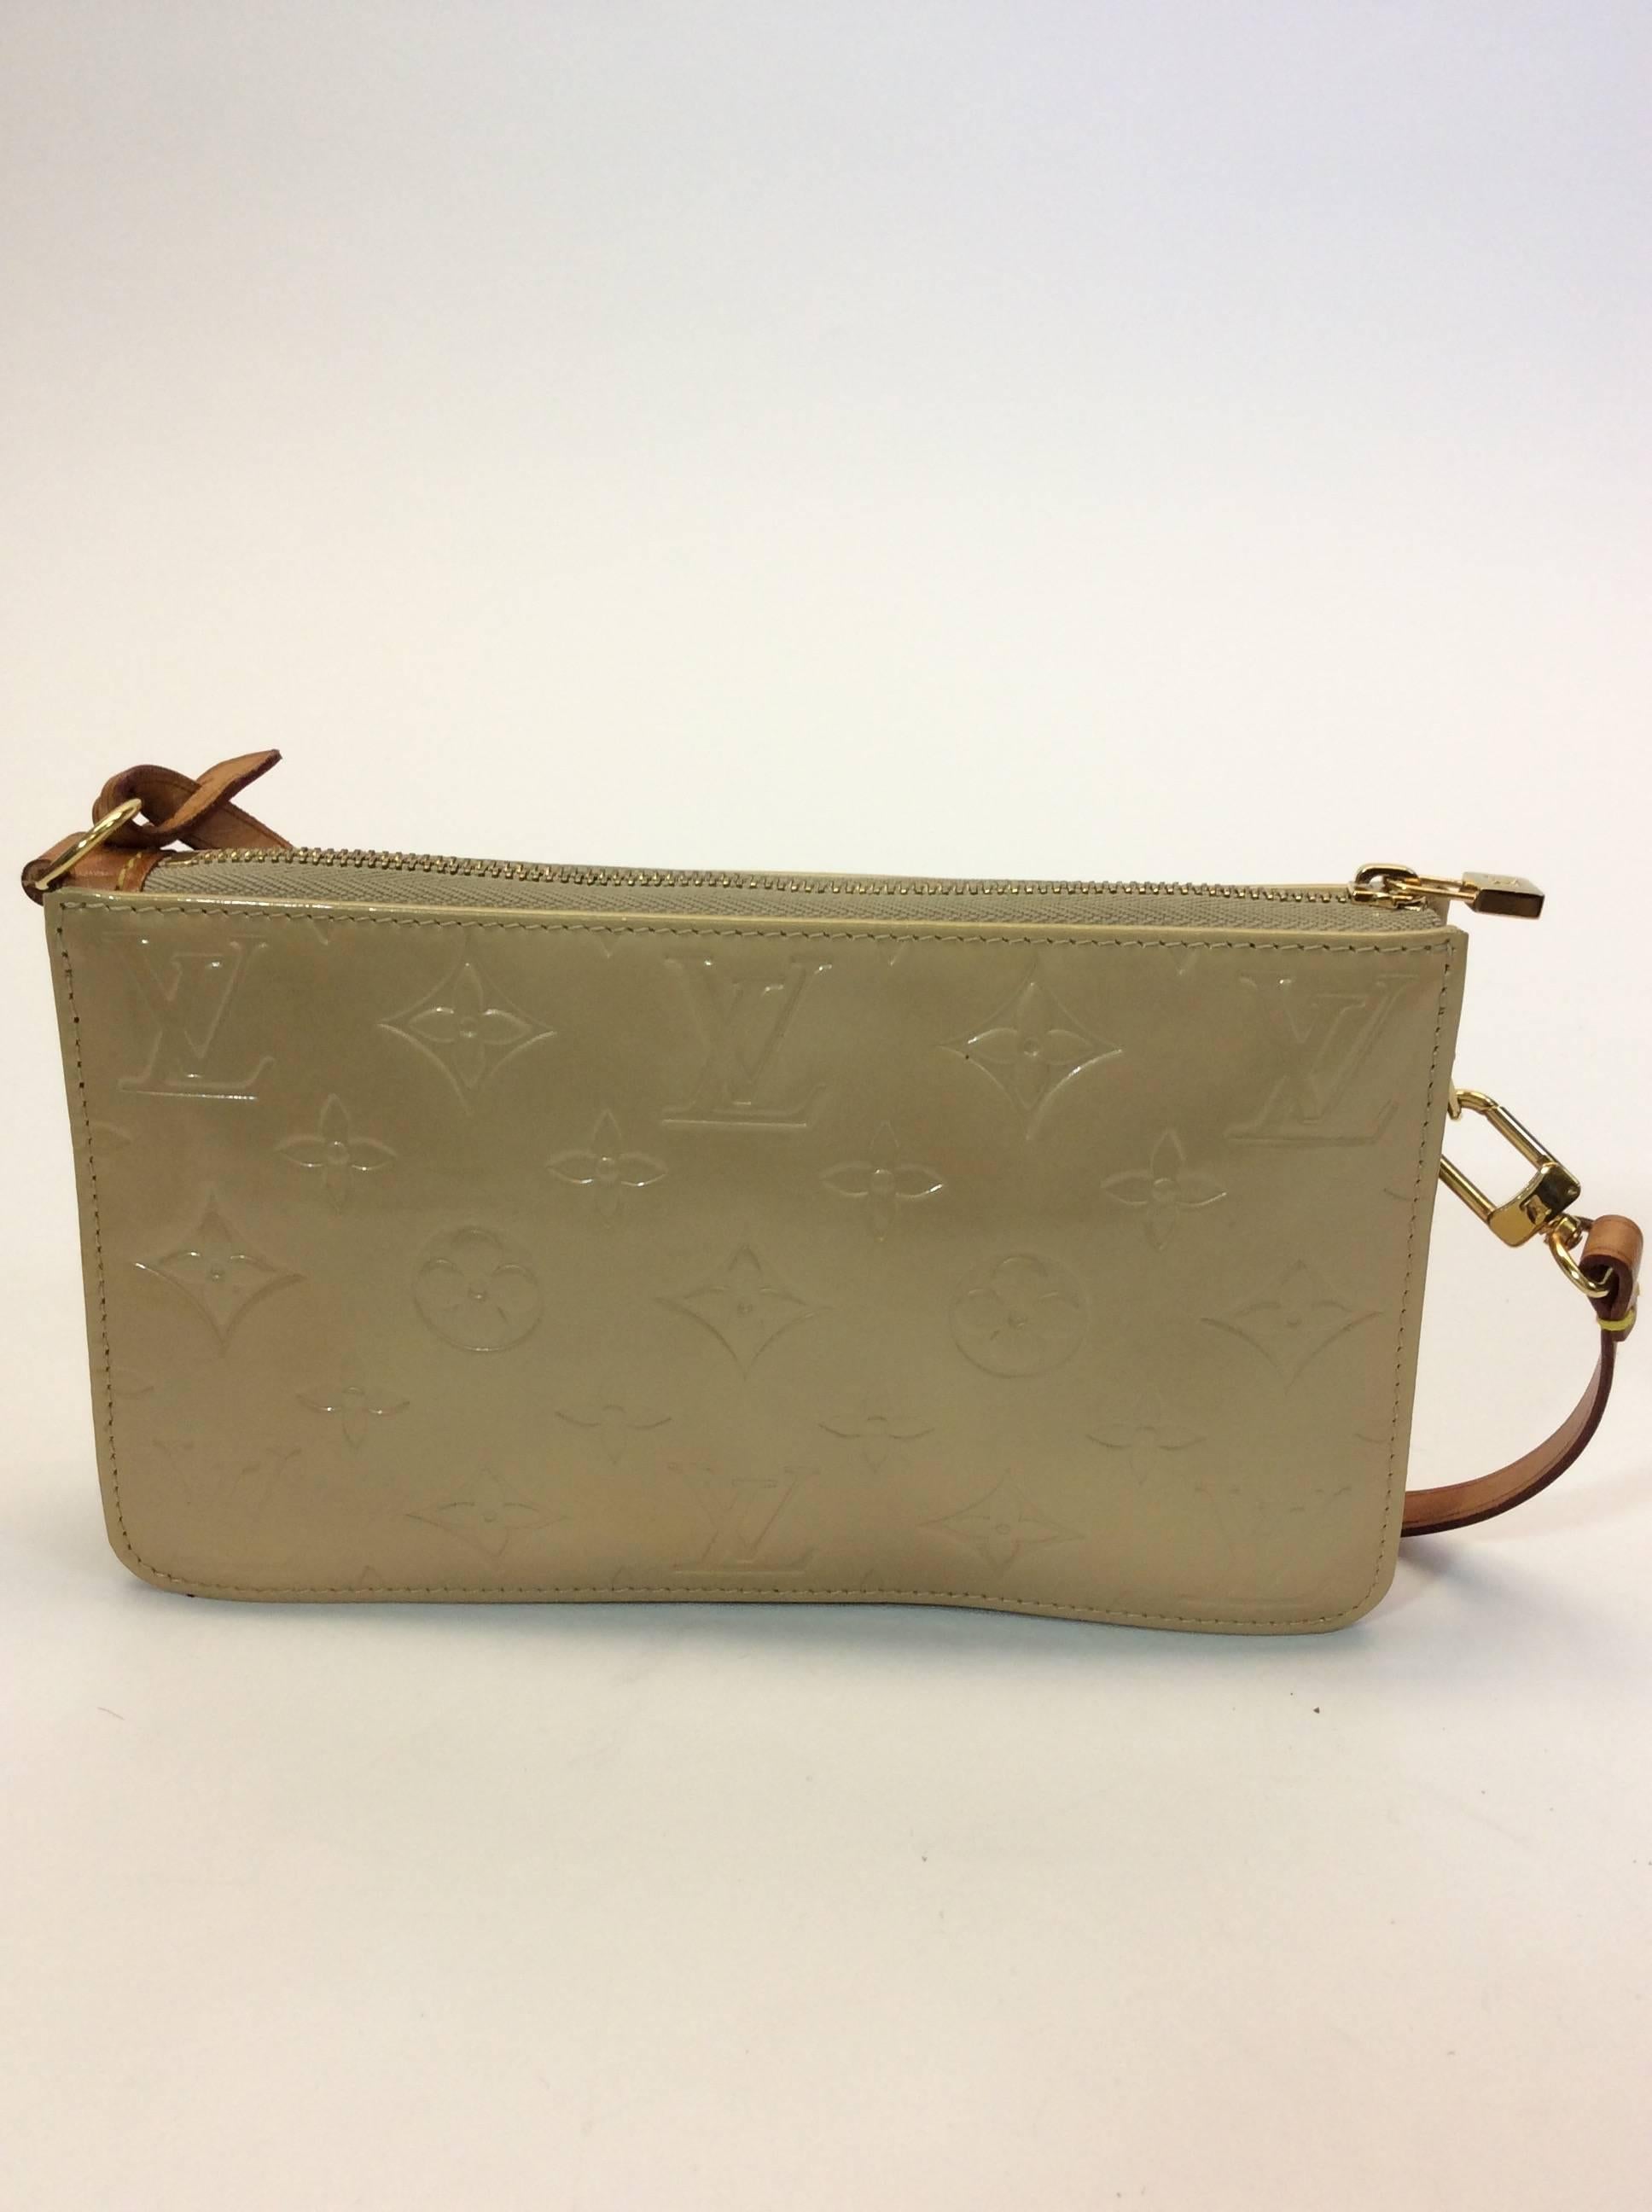 Brown Louis Vuitton Small Tan Patent Leather Monogrammed Handbag For Sale